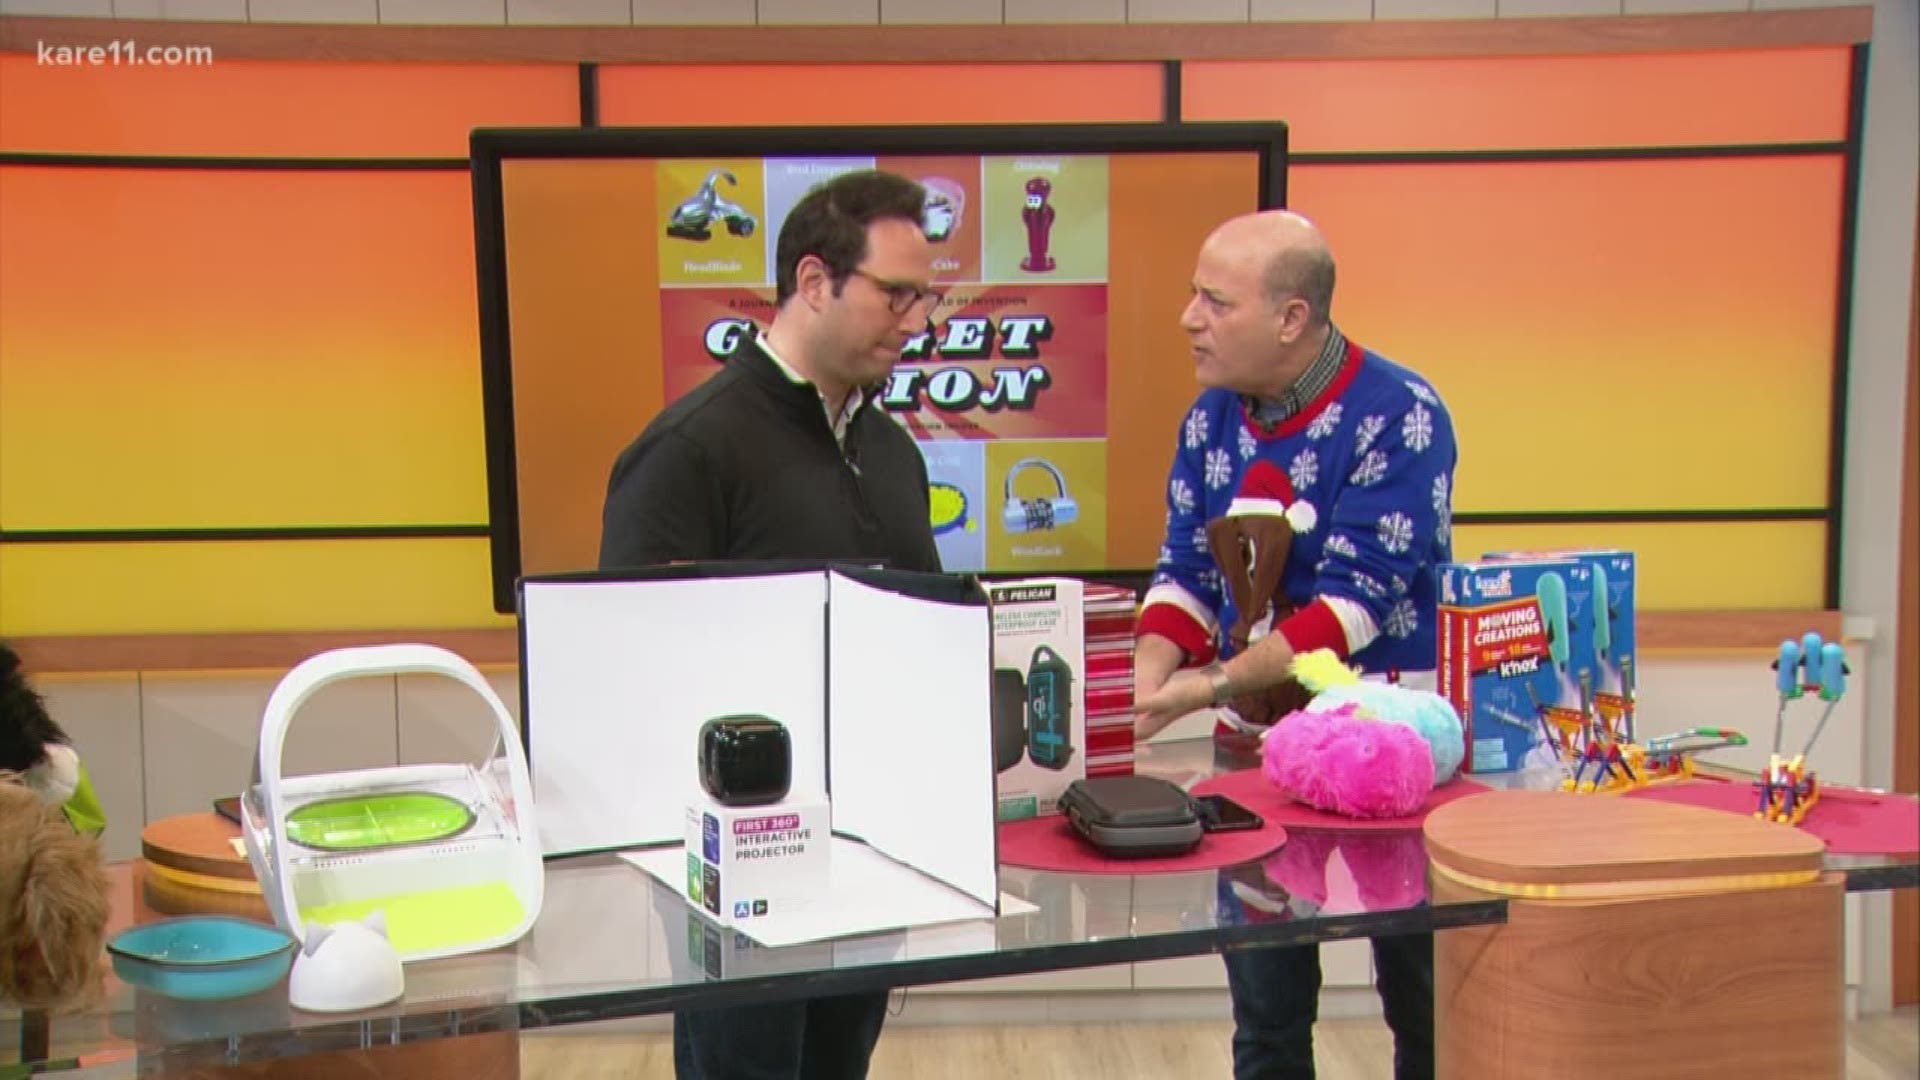 You can cross the techie off your gift list after this segment.